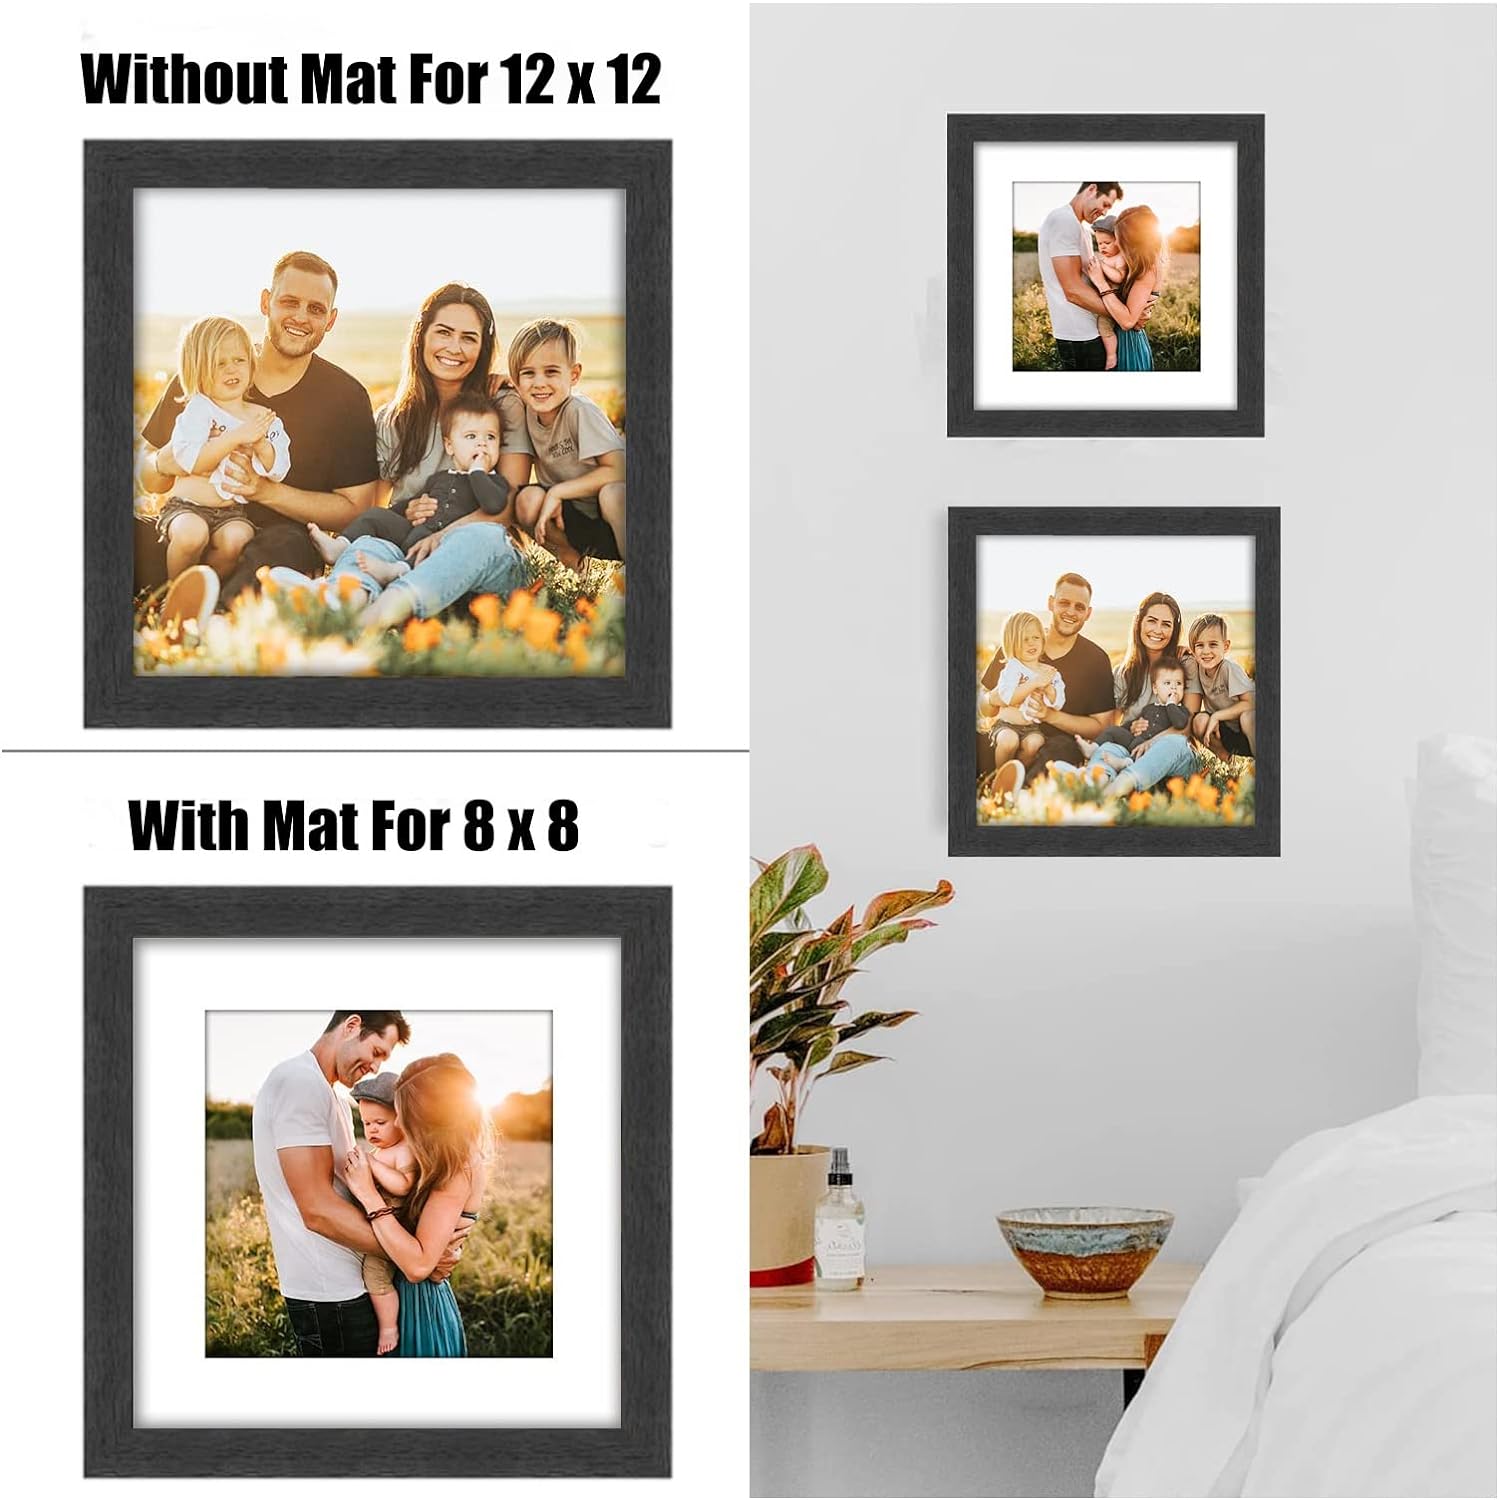 VMUZEDER 12X12 Picture Frame Black Wood Set of 2 with High Definition Glass Display 12x12 Without Mat or 8x8 Photos with Mat for Table Top and Wall